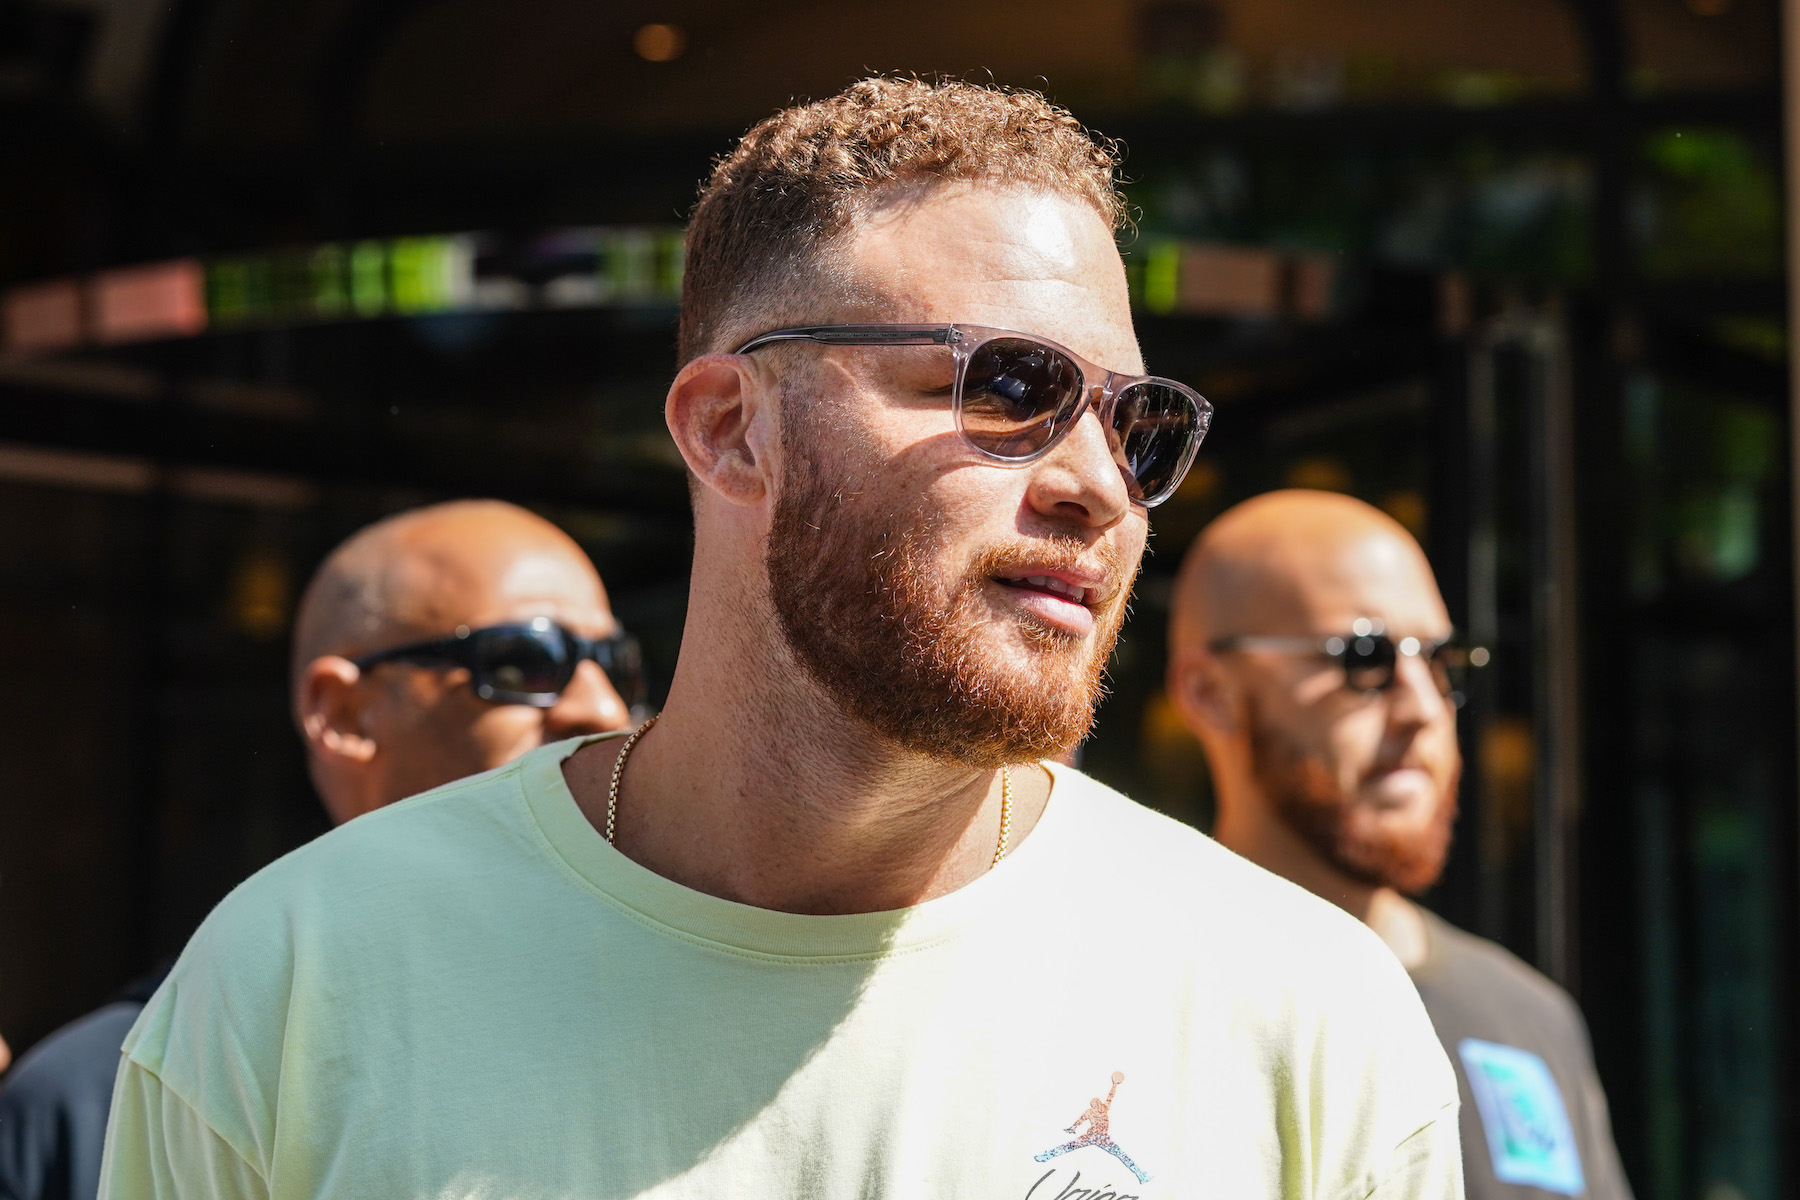 NBA player Blake Griffin in 2020